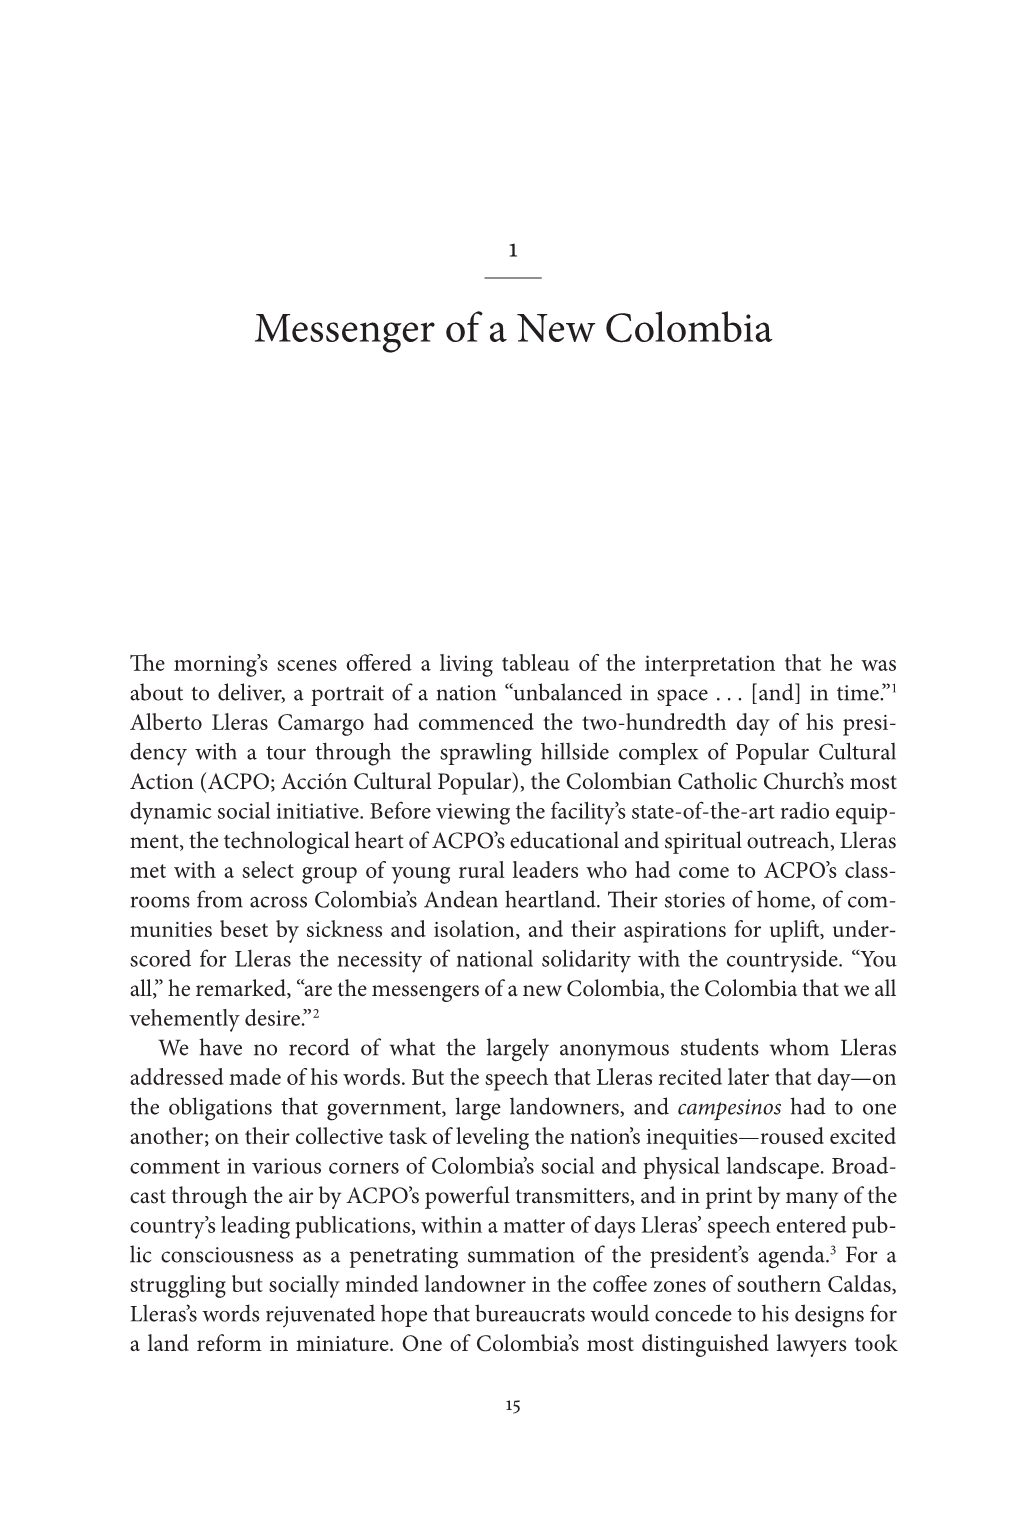 Messenger of a New Colombia